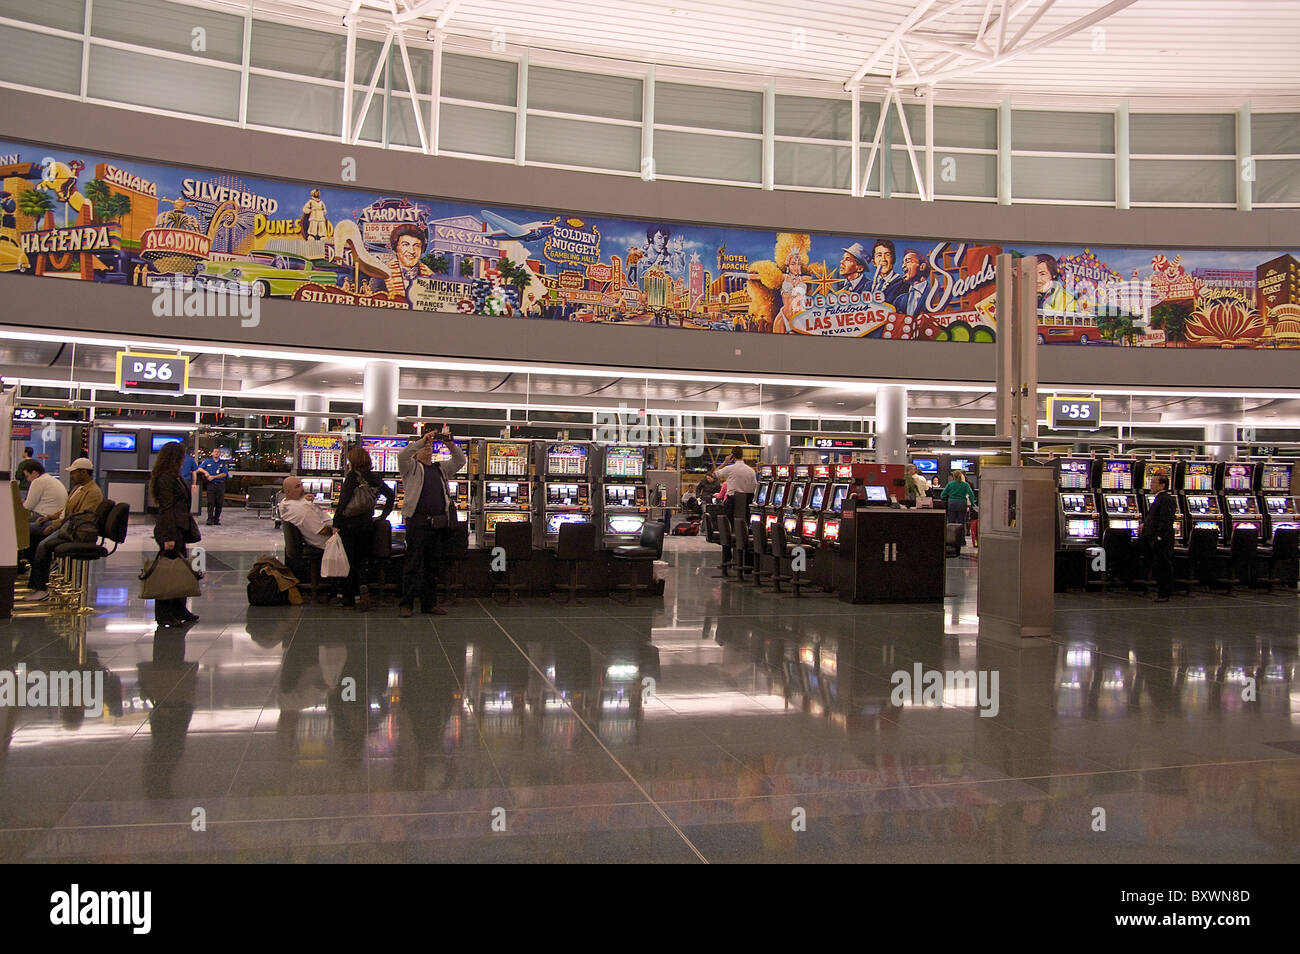 Slot machines and a mural depicting famous Las Vegas landmarks and celebrities at McCarran International Airport Stock Photo